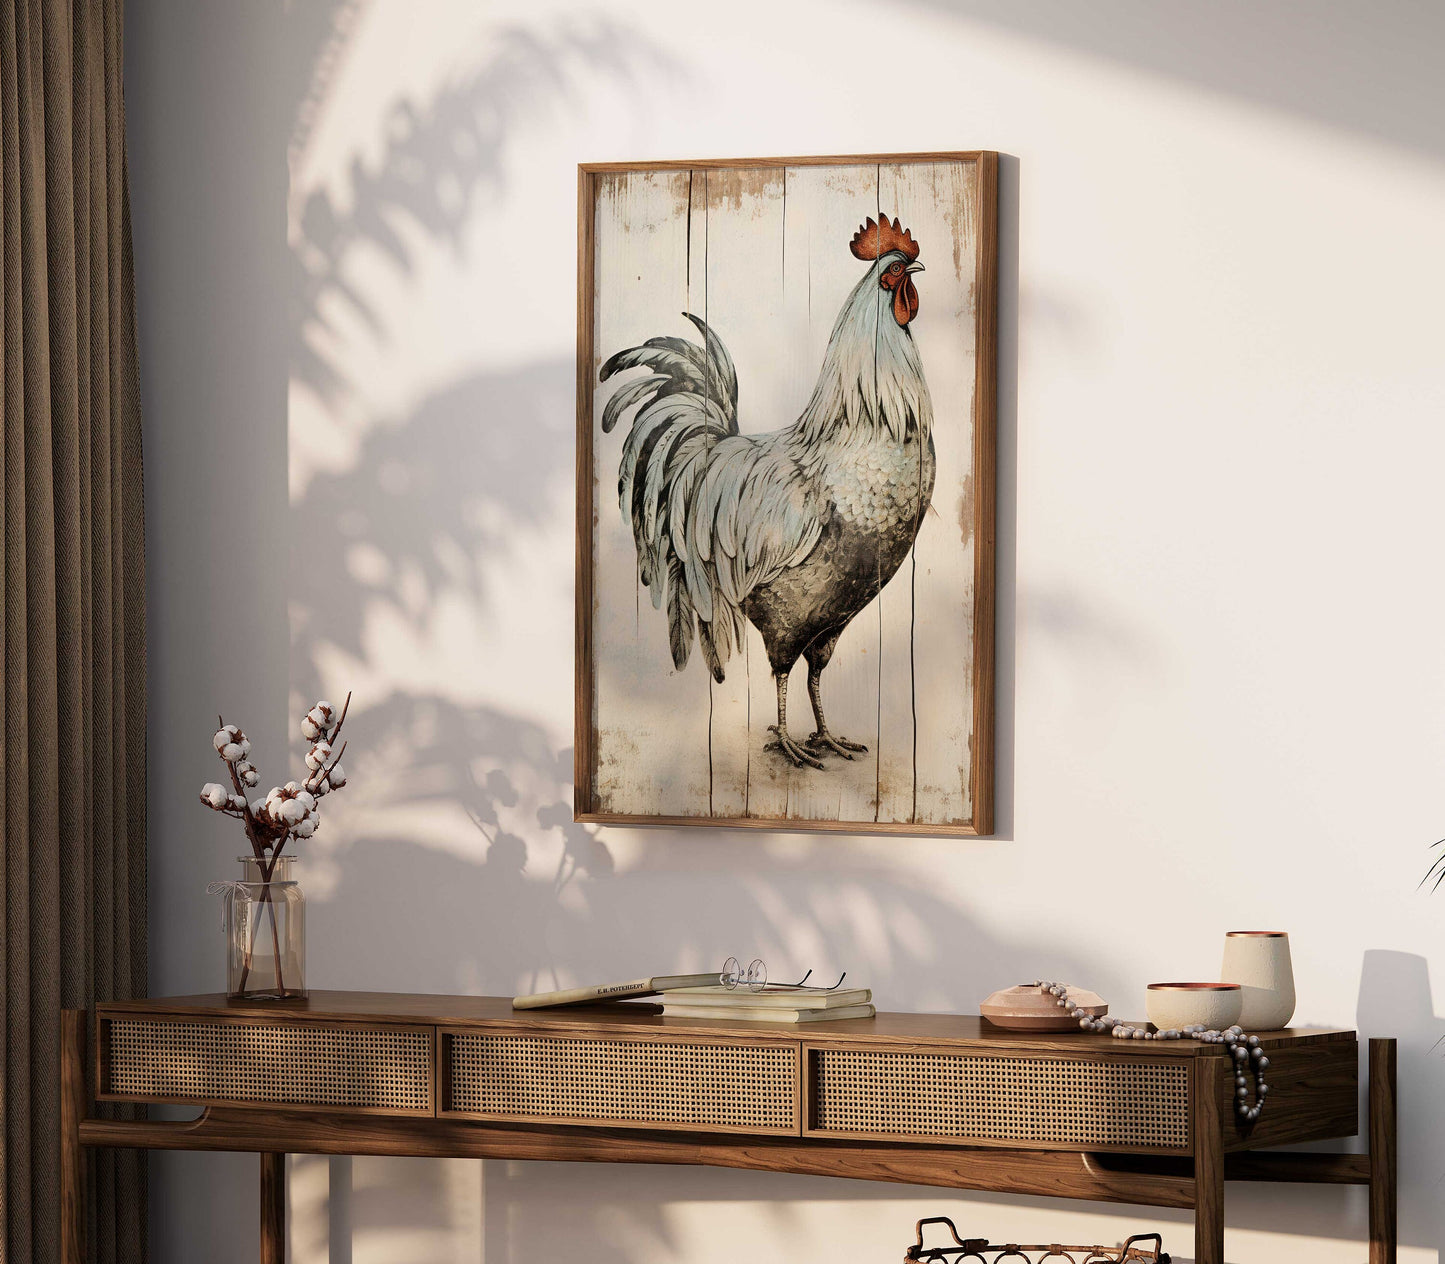 Vintage Rooster Print, Cock Wall Art, Rustic Farmhouse Decor, Poultry Print, Farm Animal Painting, Chicken Print, Printable Homestead Art